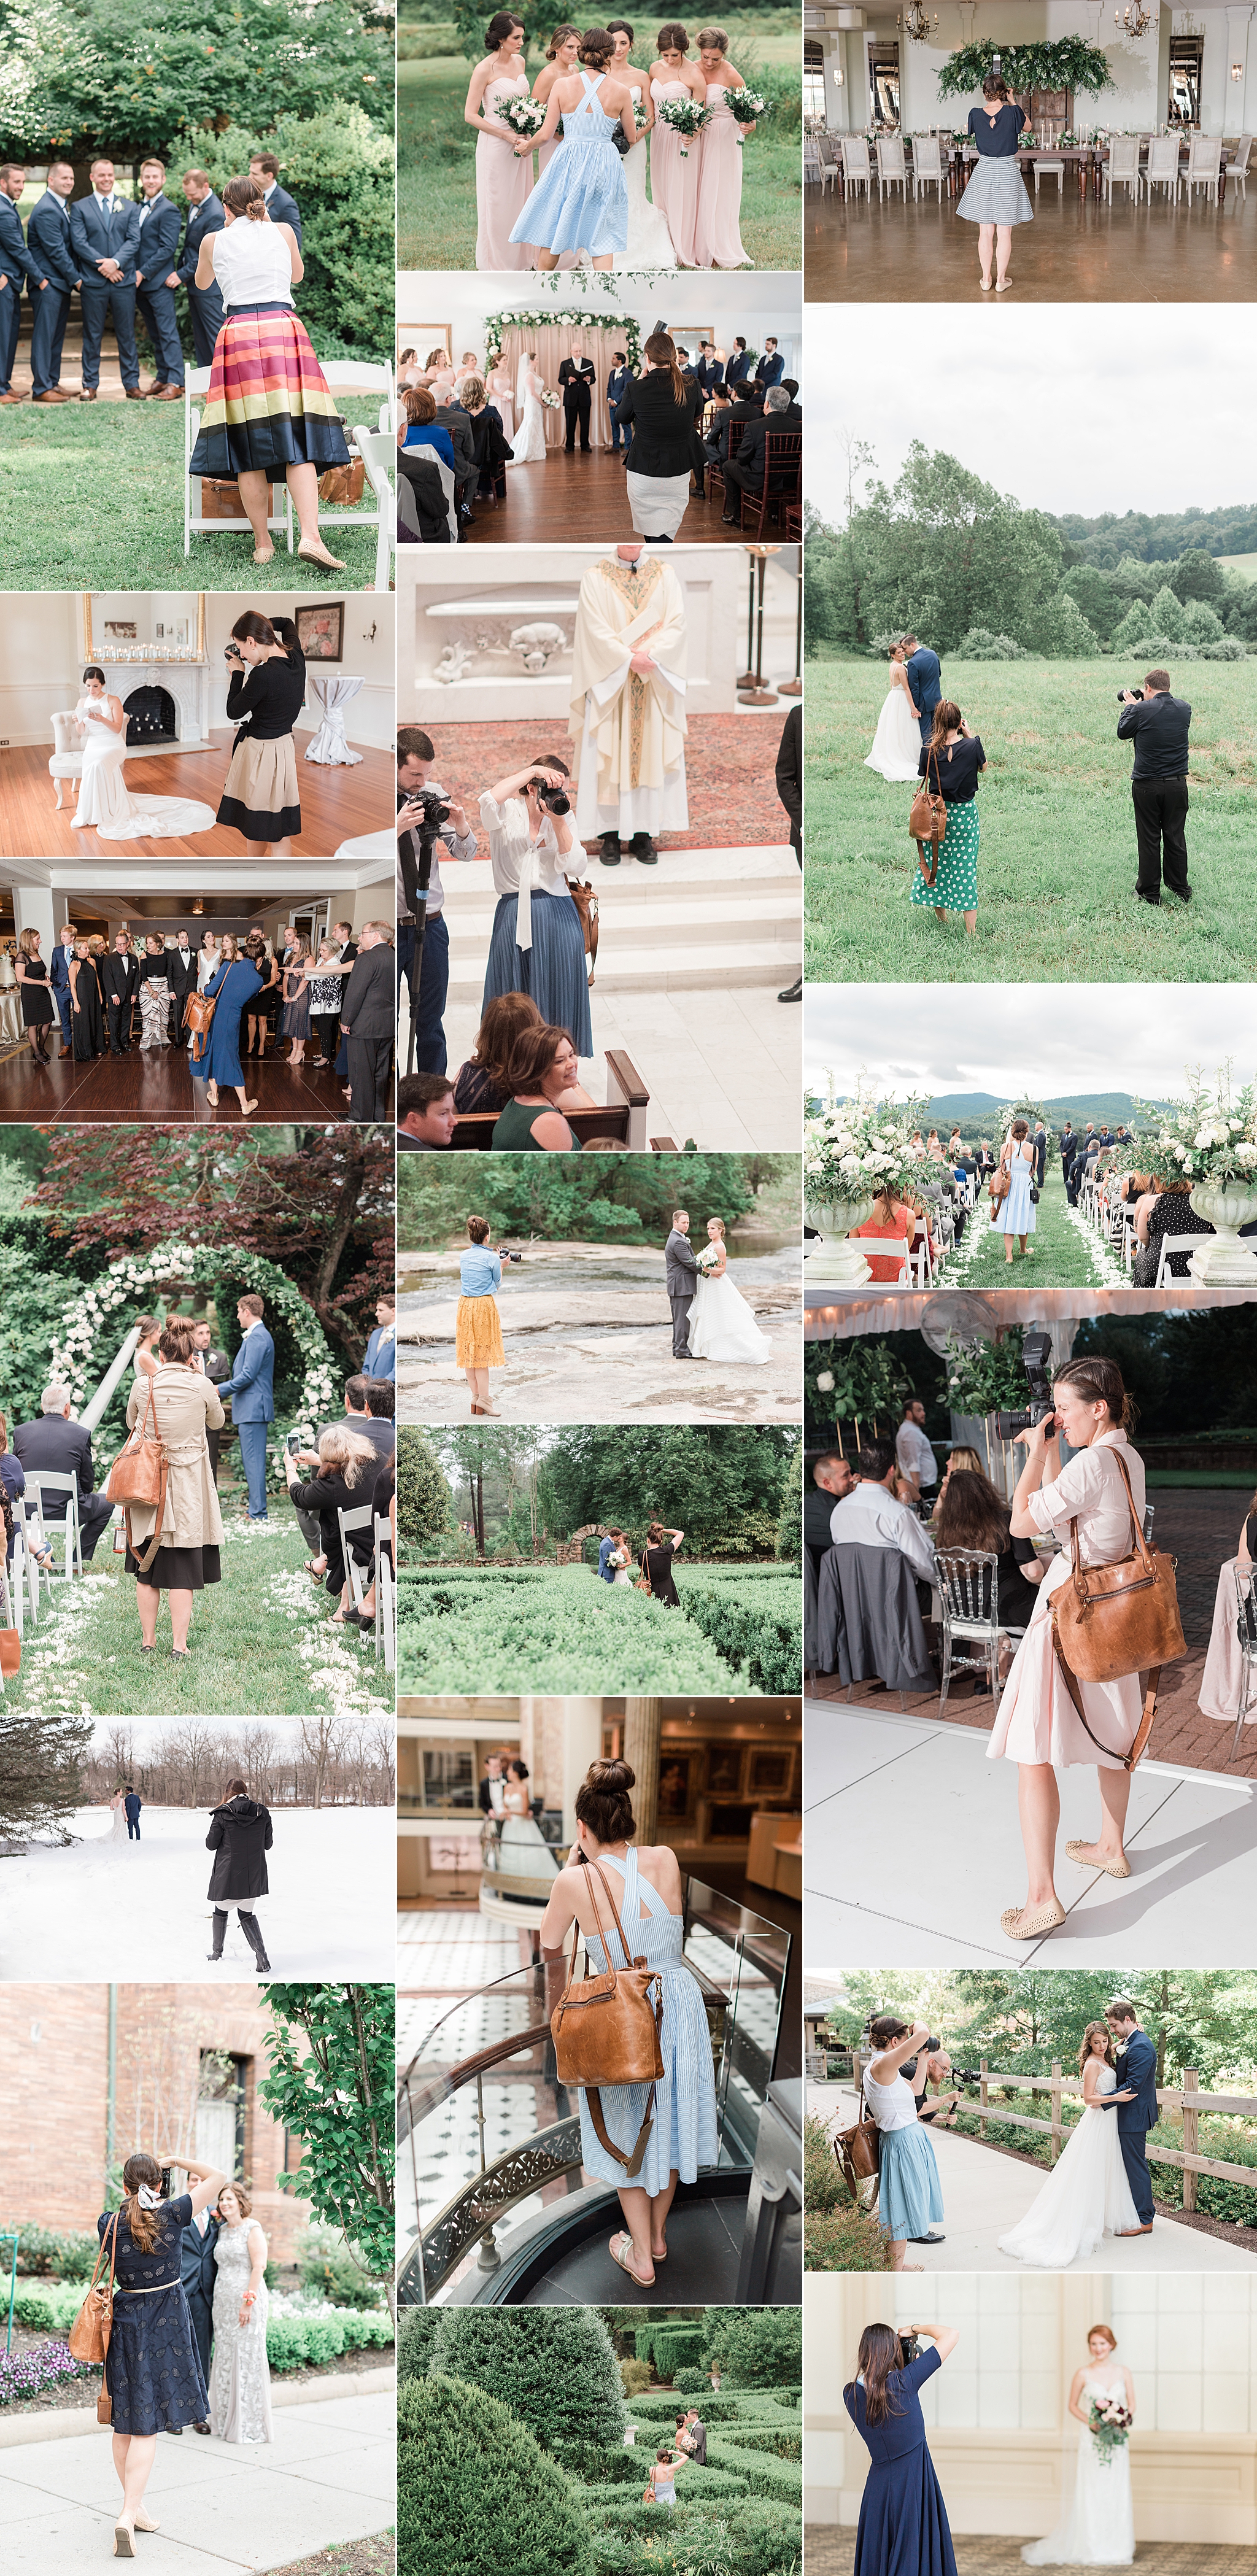 Go behind the scenes during the epic 2018 season with this Washington, DC wedding photographer to see all the fun that takes place on a client's big day!